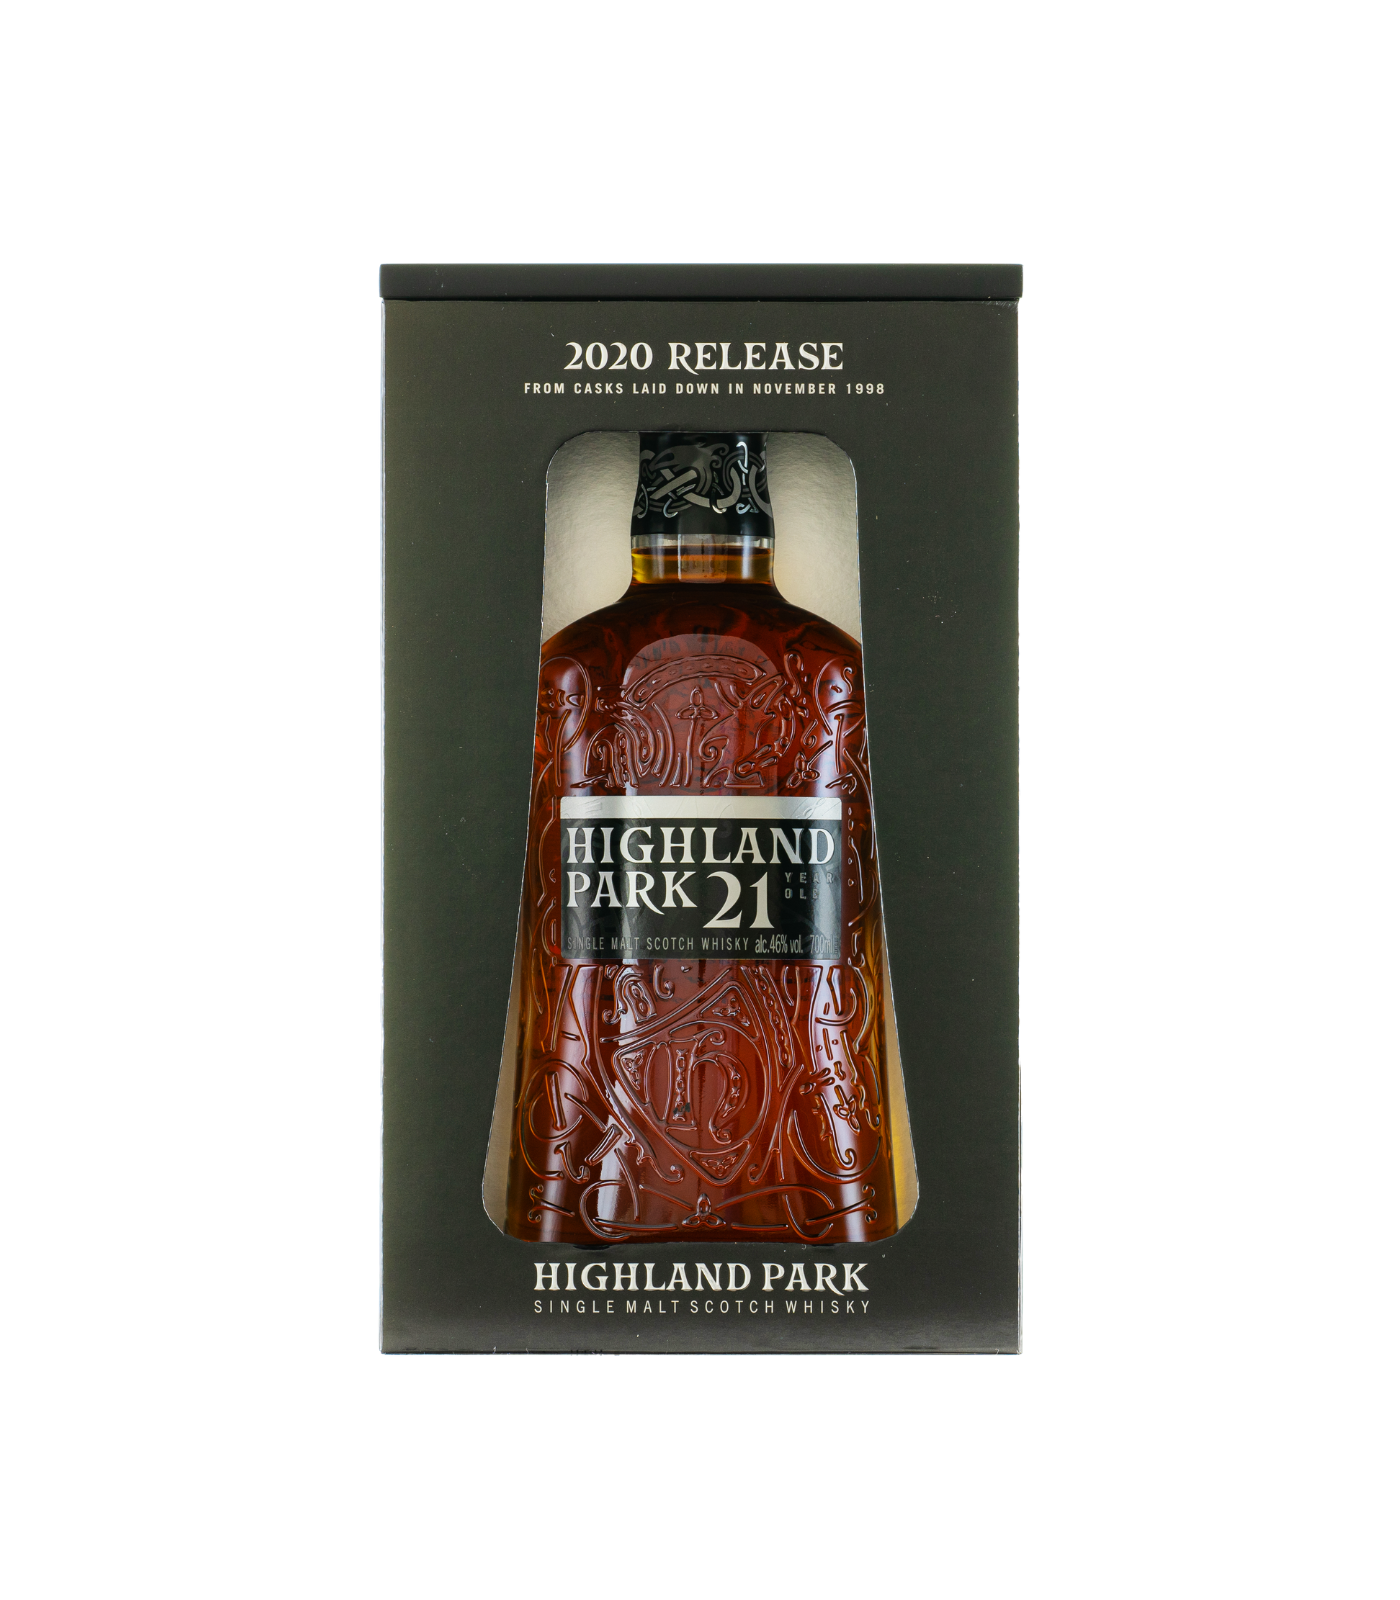 Highland Park 21 Year Old Whisky - 2020 Release (70cl; 46%)